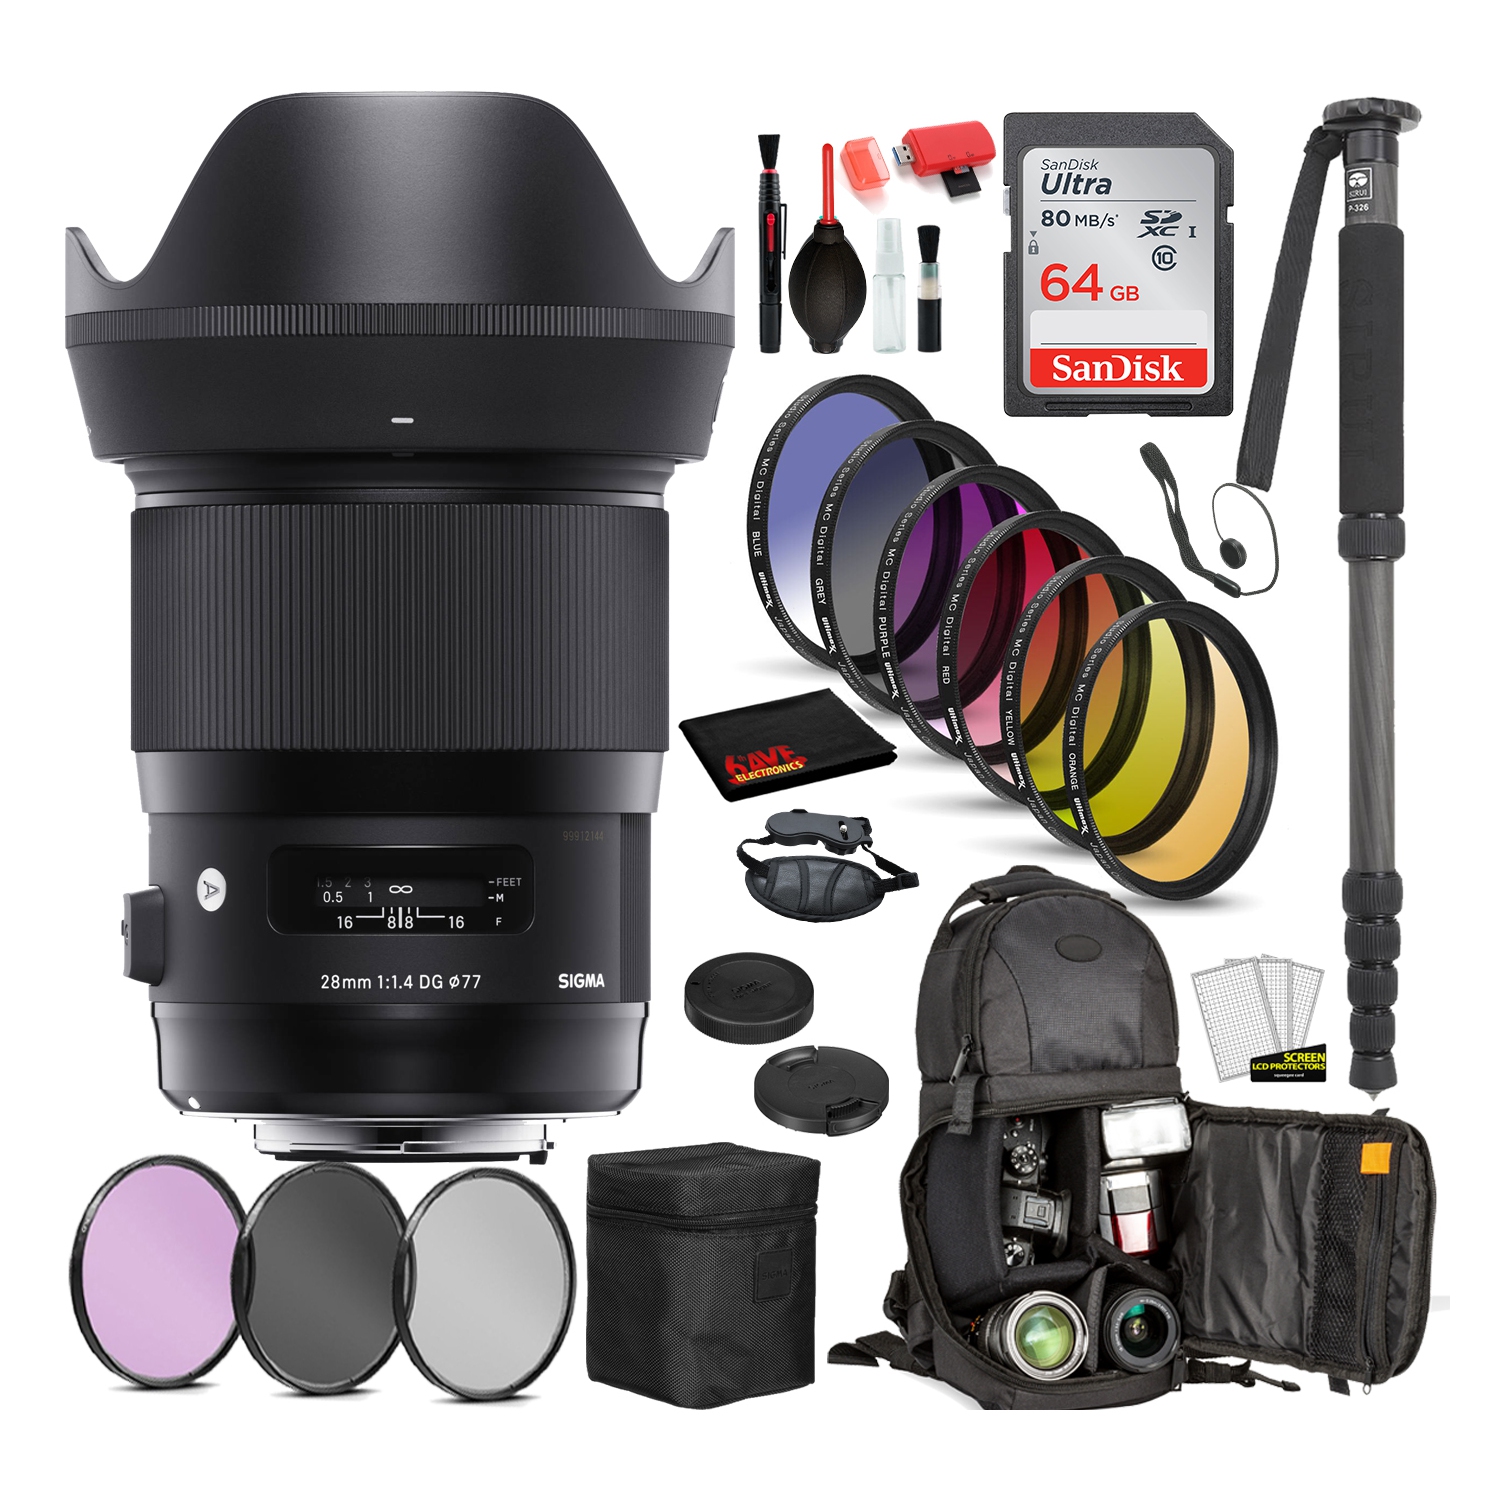 Sigma 28mm f/1.4 DG HSM Art Lens for Sony E Mount (441965) with: Sandisk 64gb SD Card, 9PC Filter Kit + More